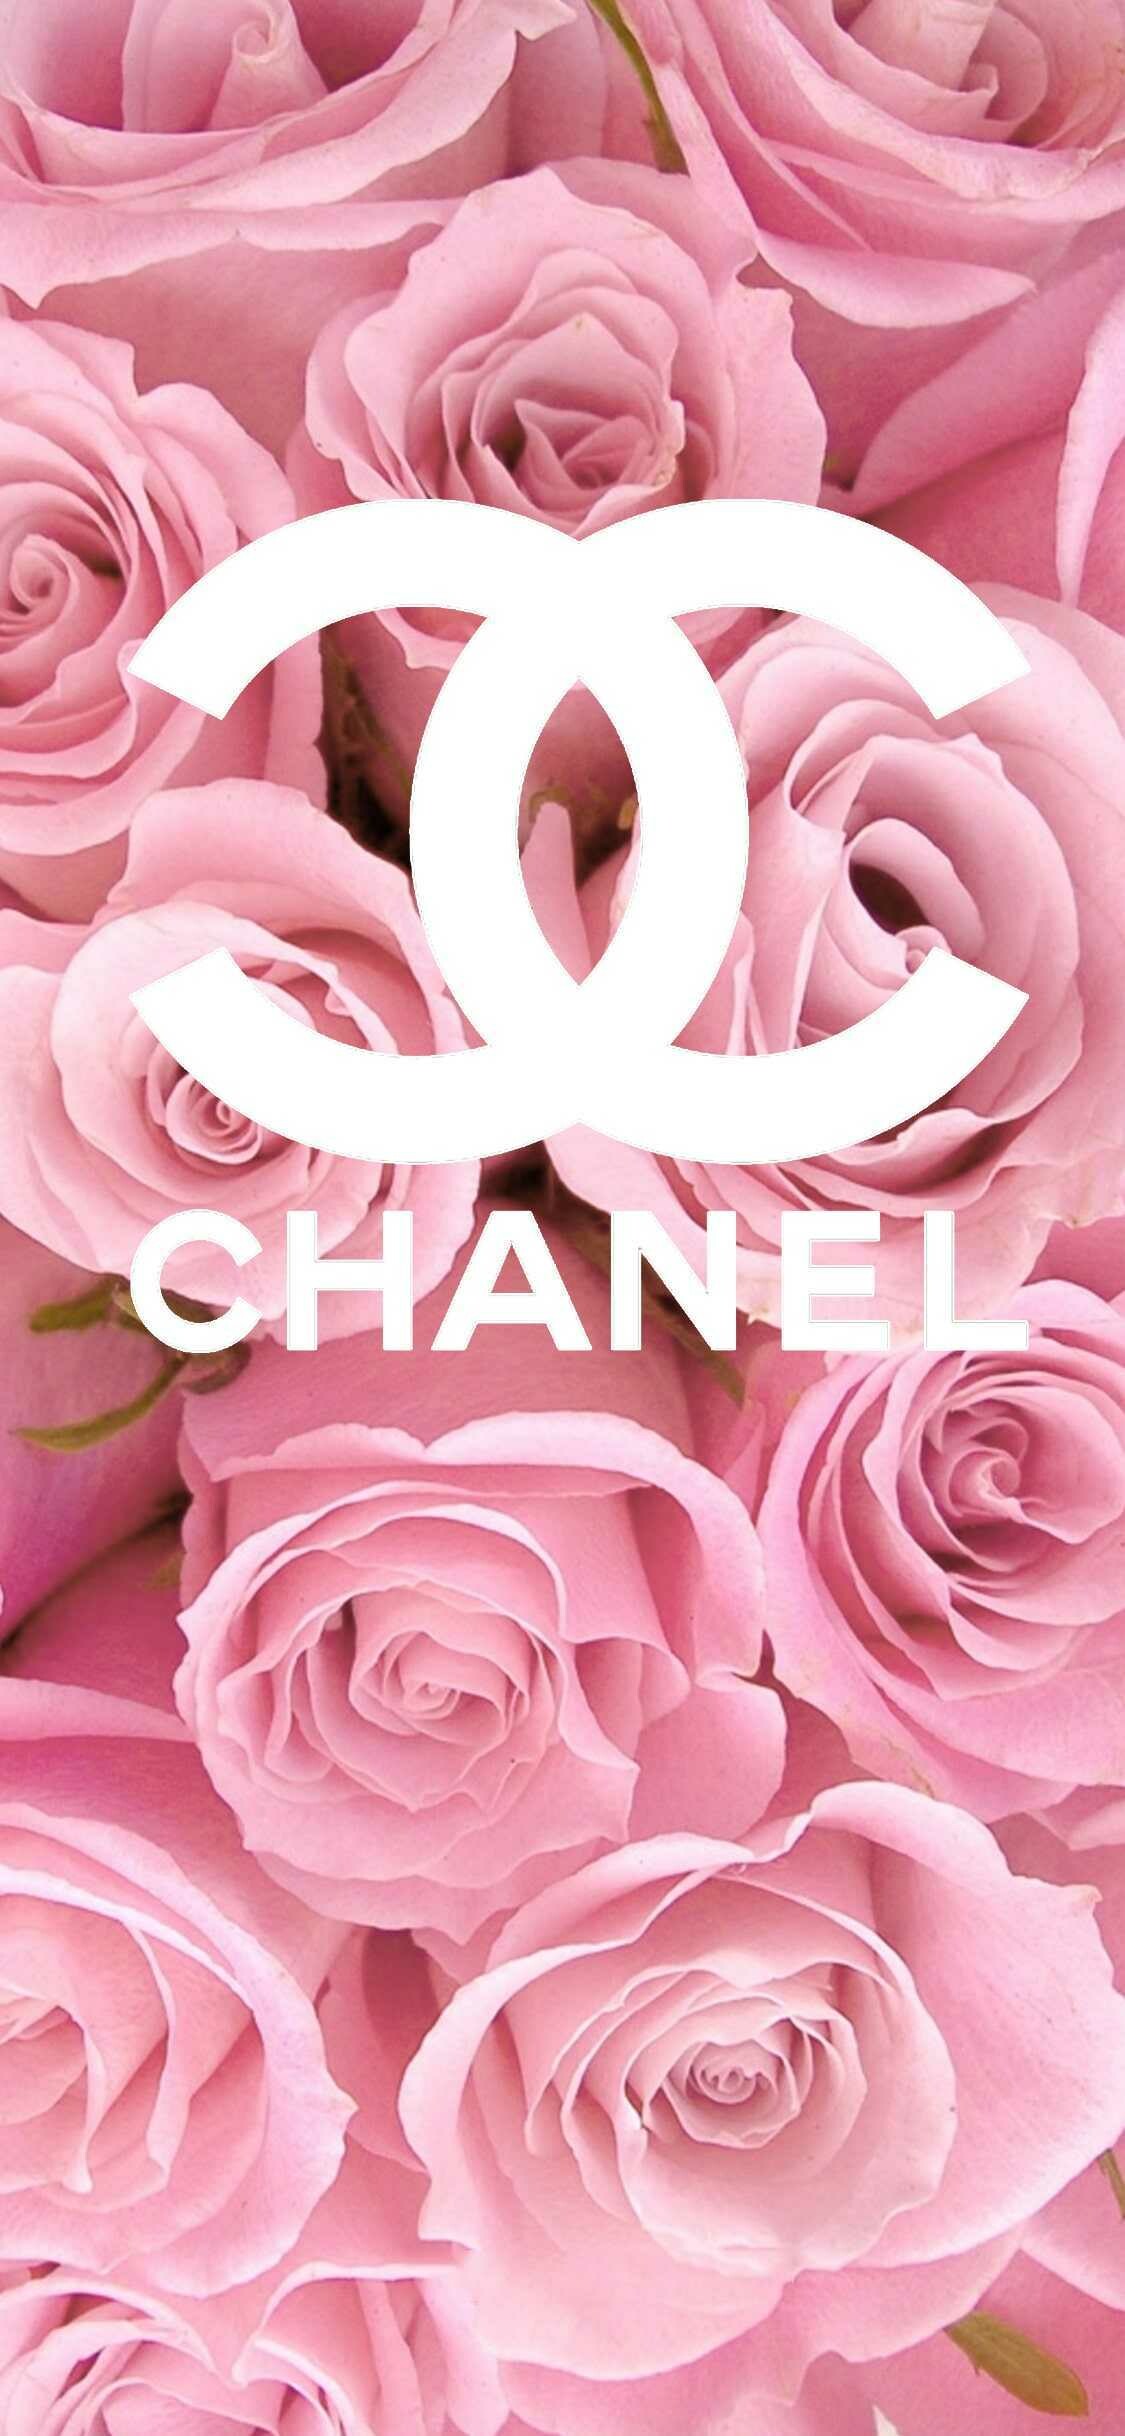 Chanel: Started as a small millinery shop by a fashion designer in 1909. 1130x2440 HD Background.